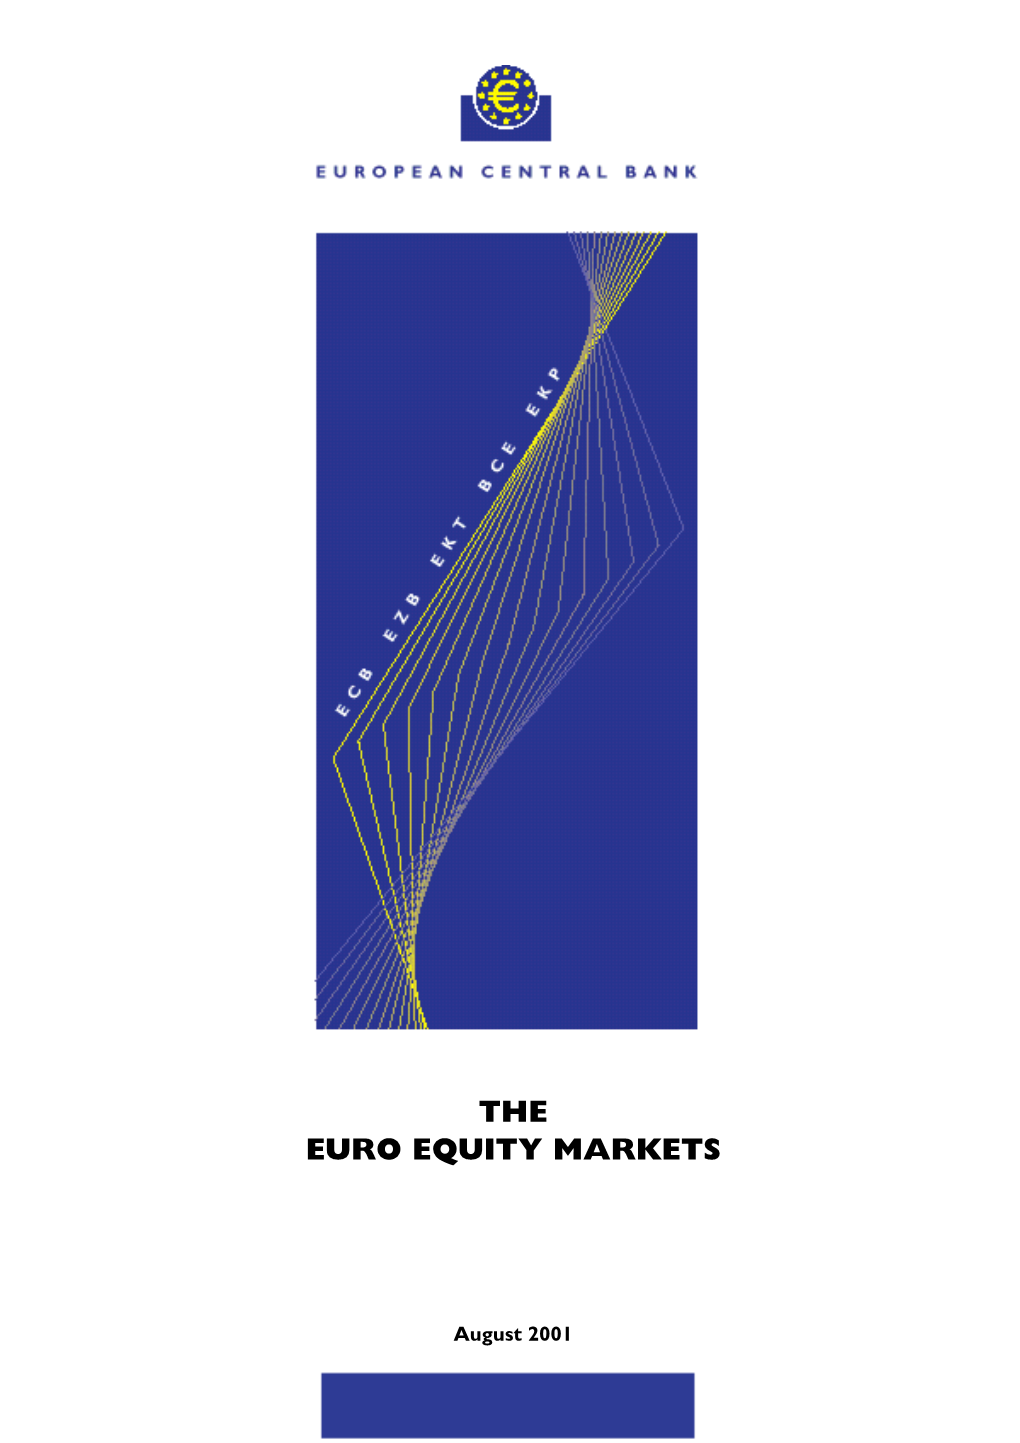 The Euro Equity Markets